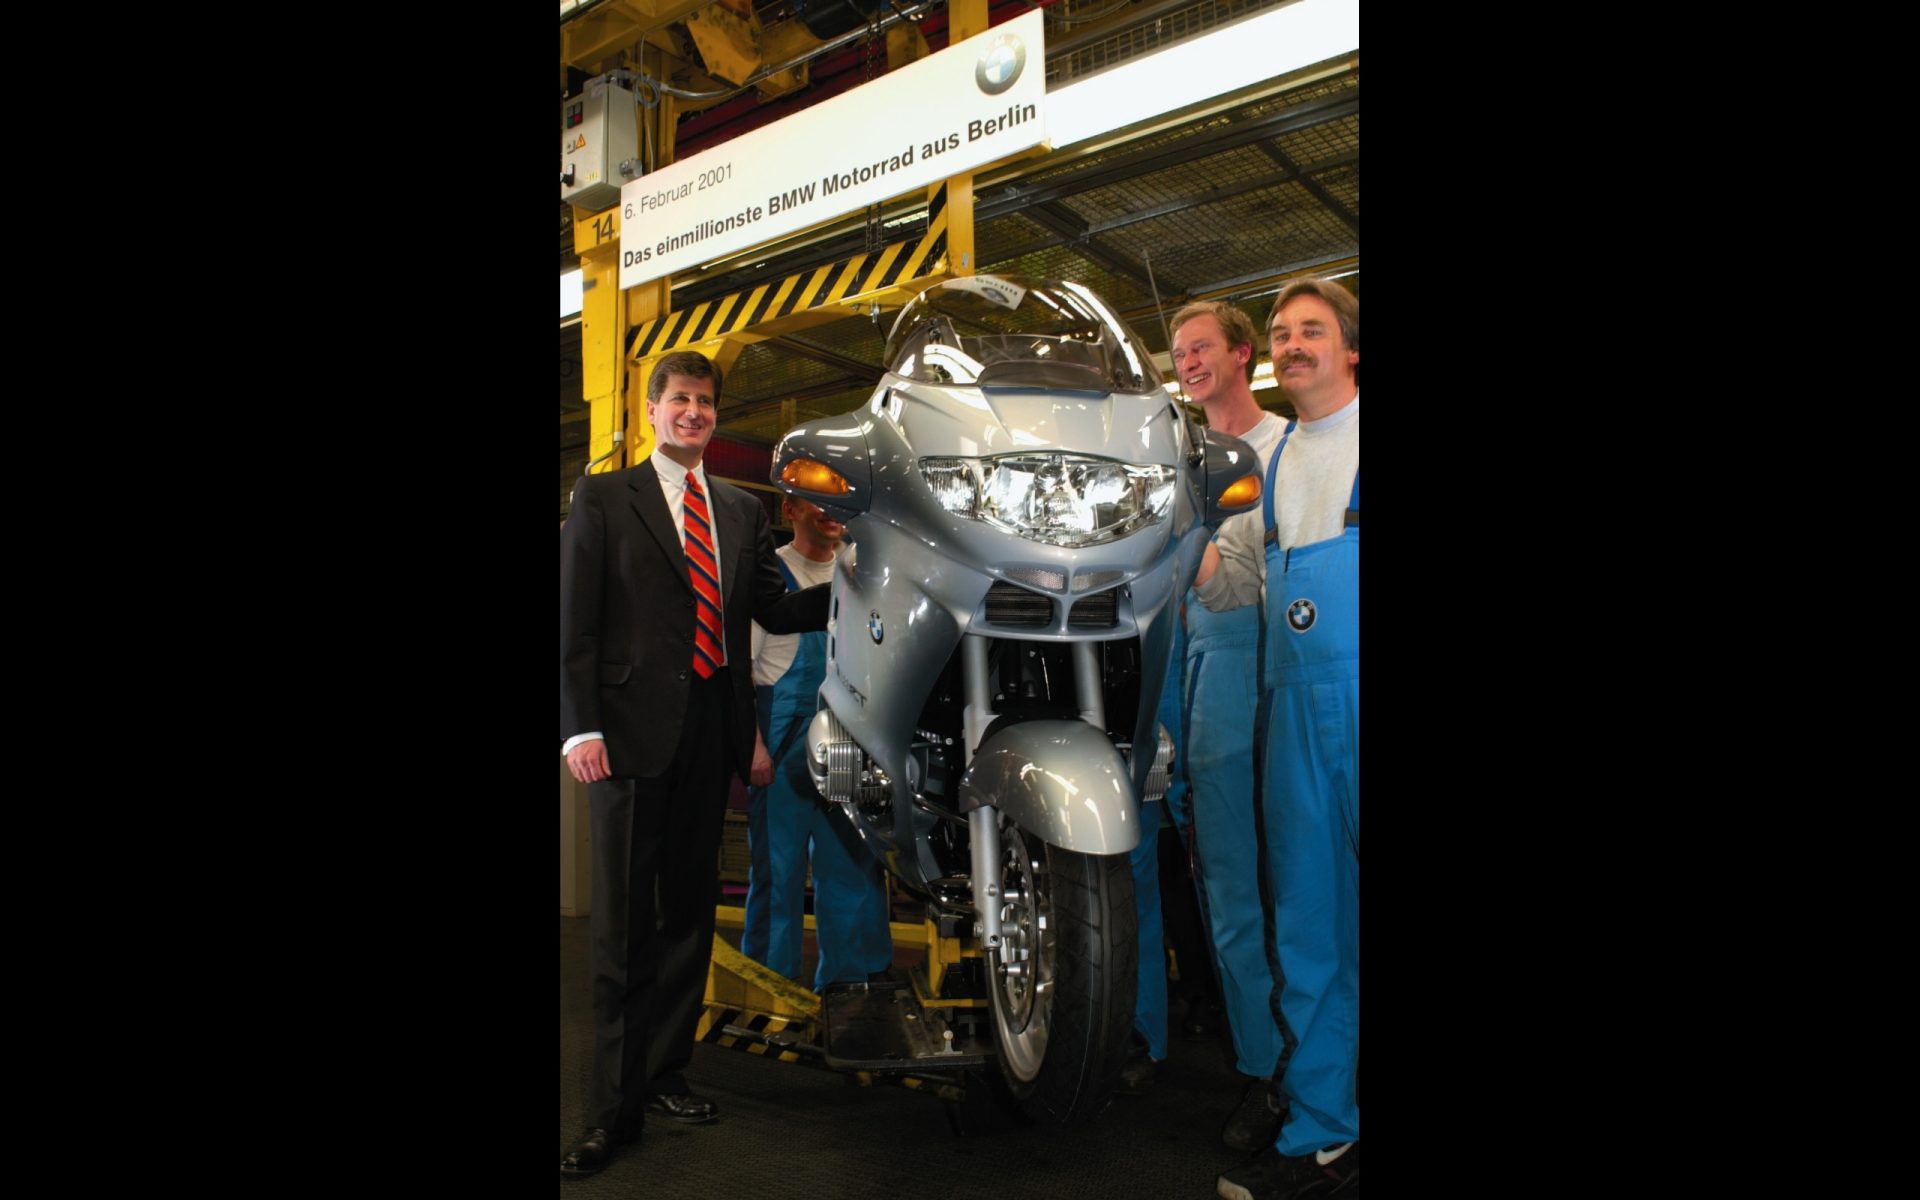 The one-millionth BMW motorcycle made in Berlin